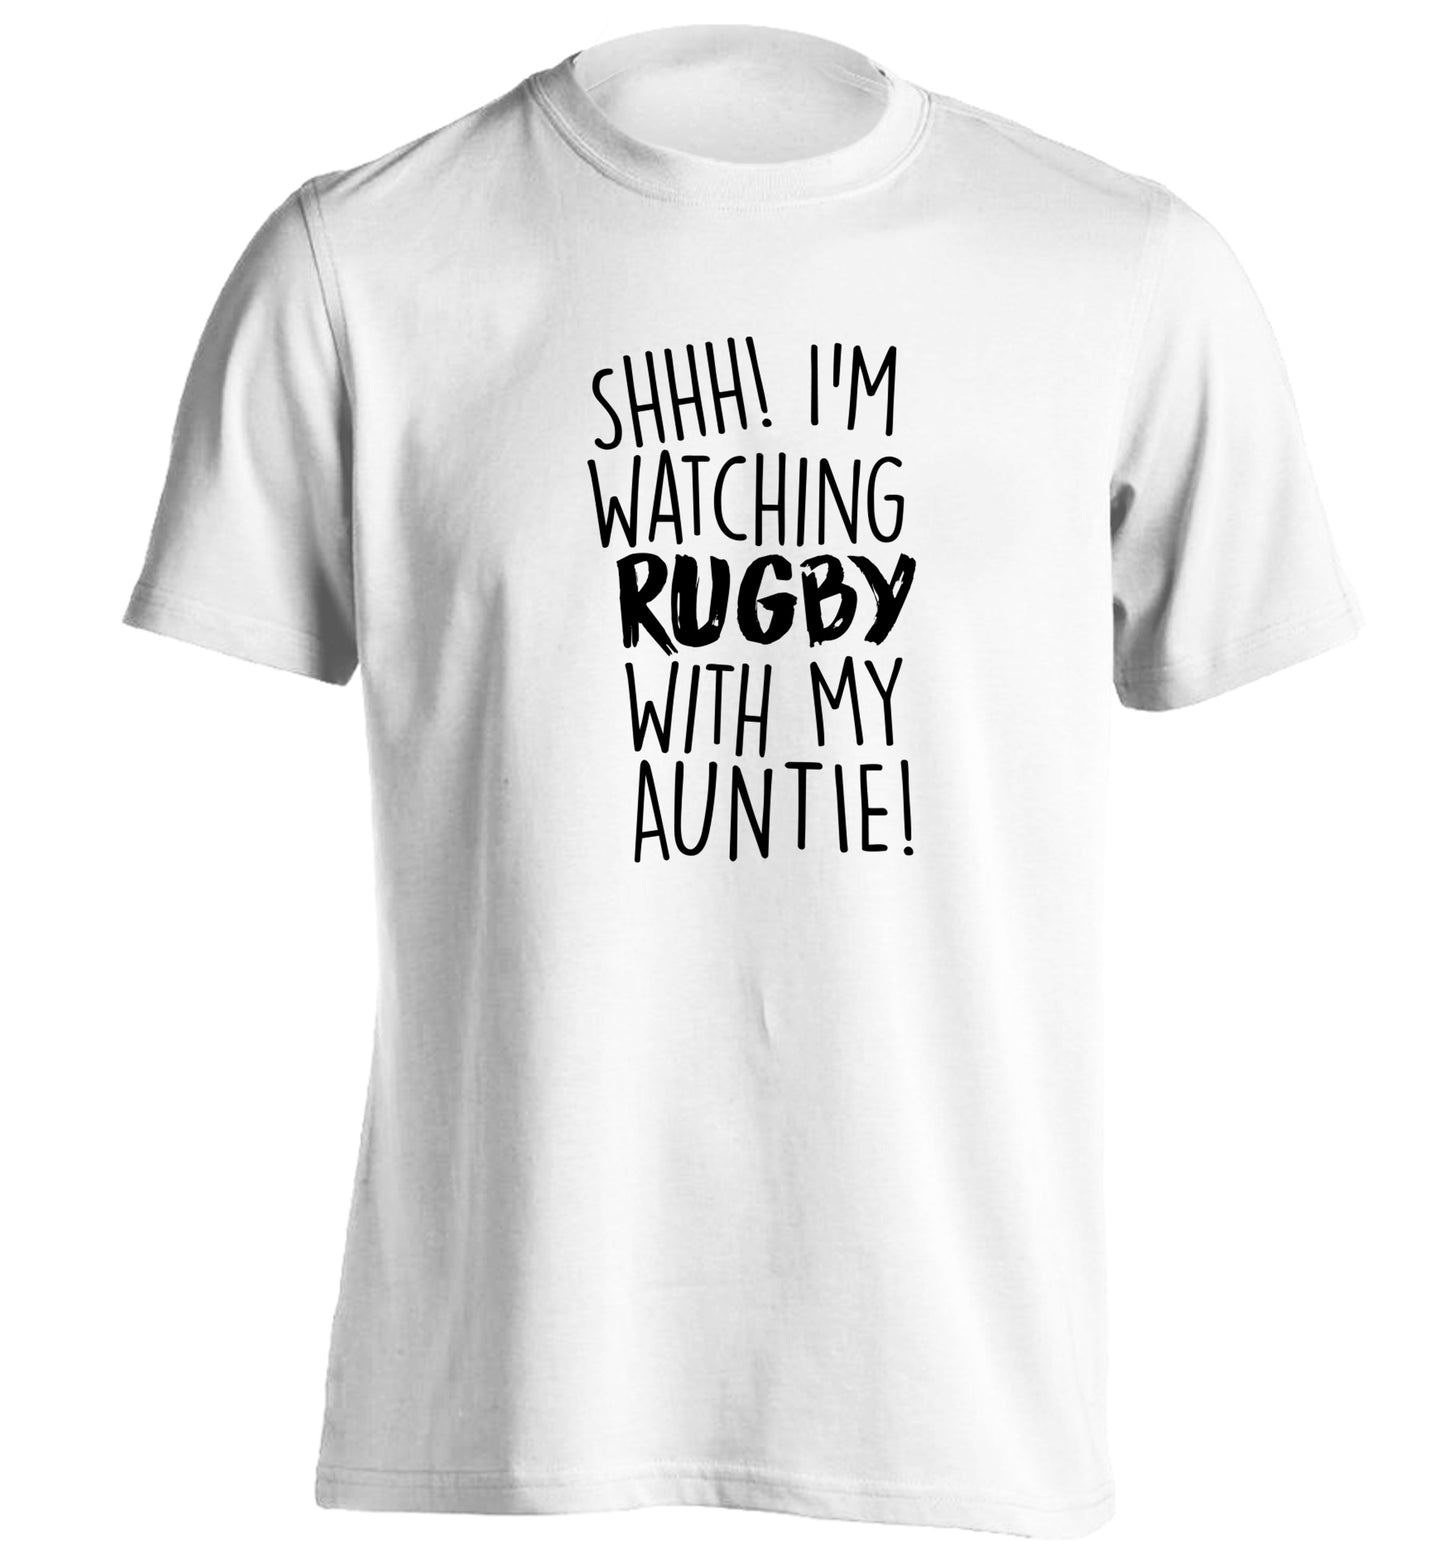 Shhh I'm watchin rugby with my auntie adults unisex white Tshirt 2XL